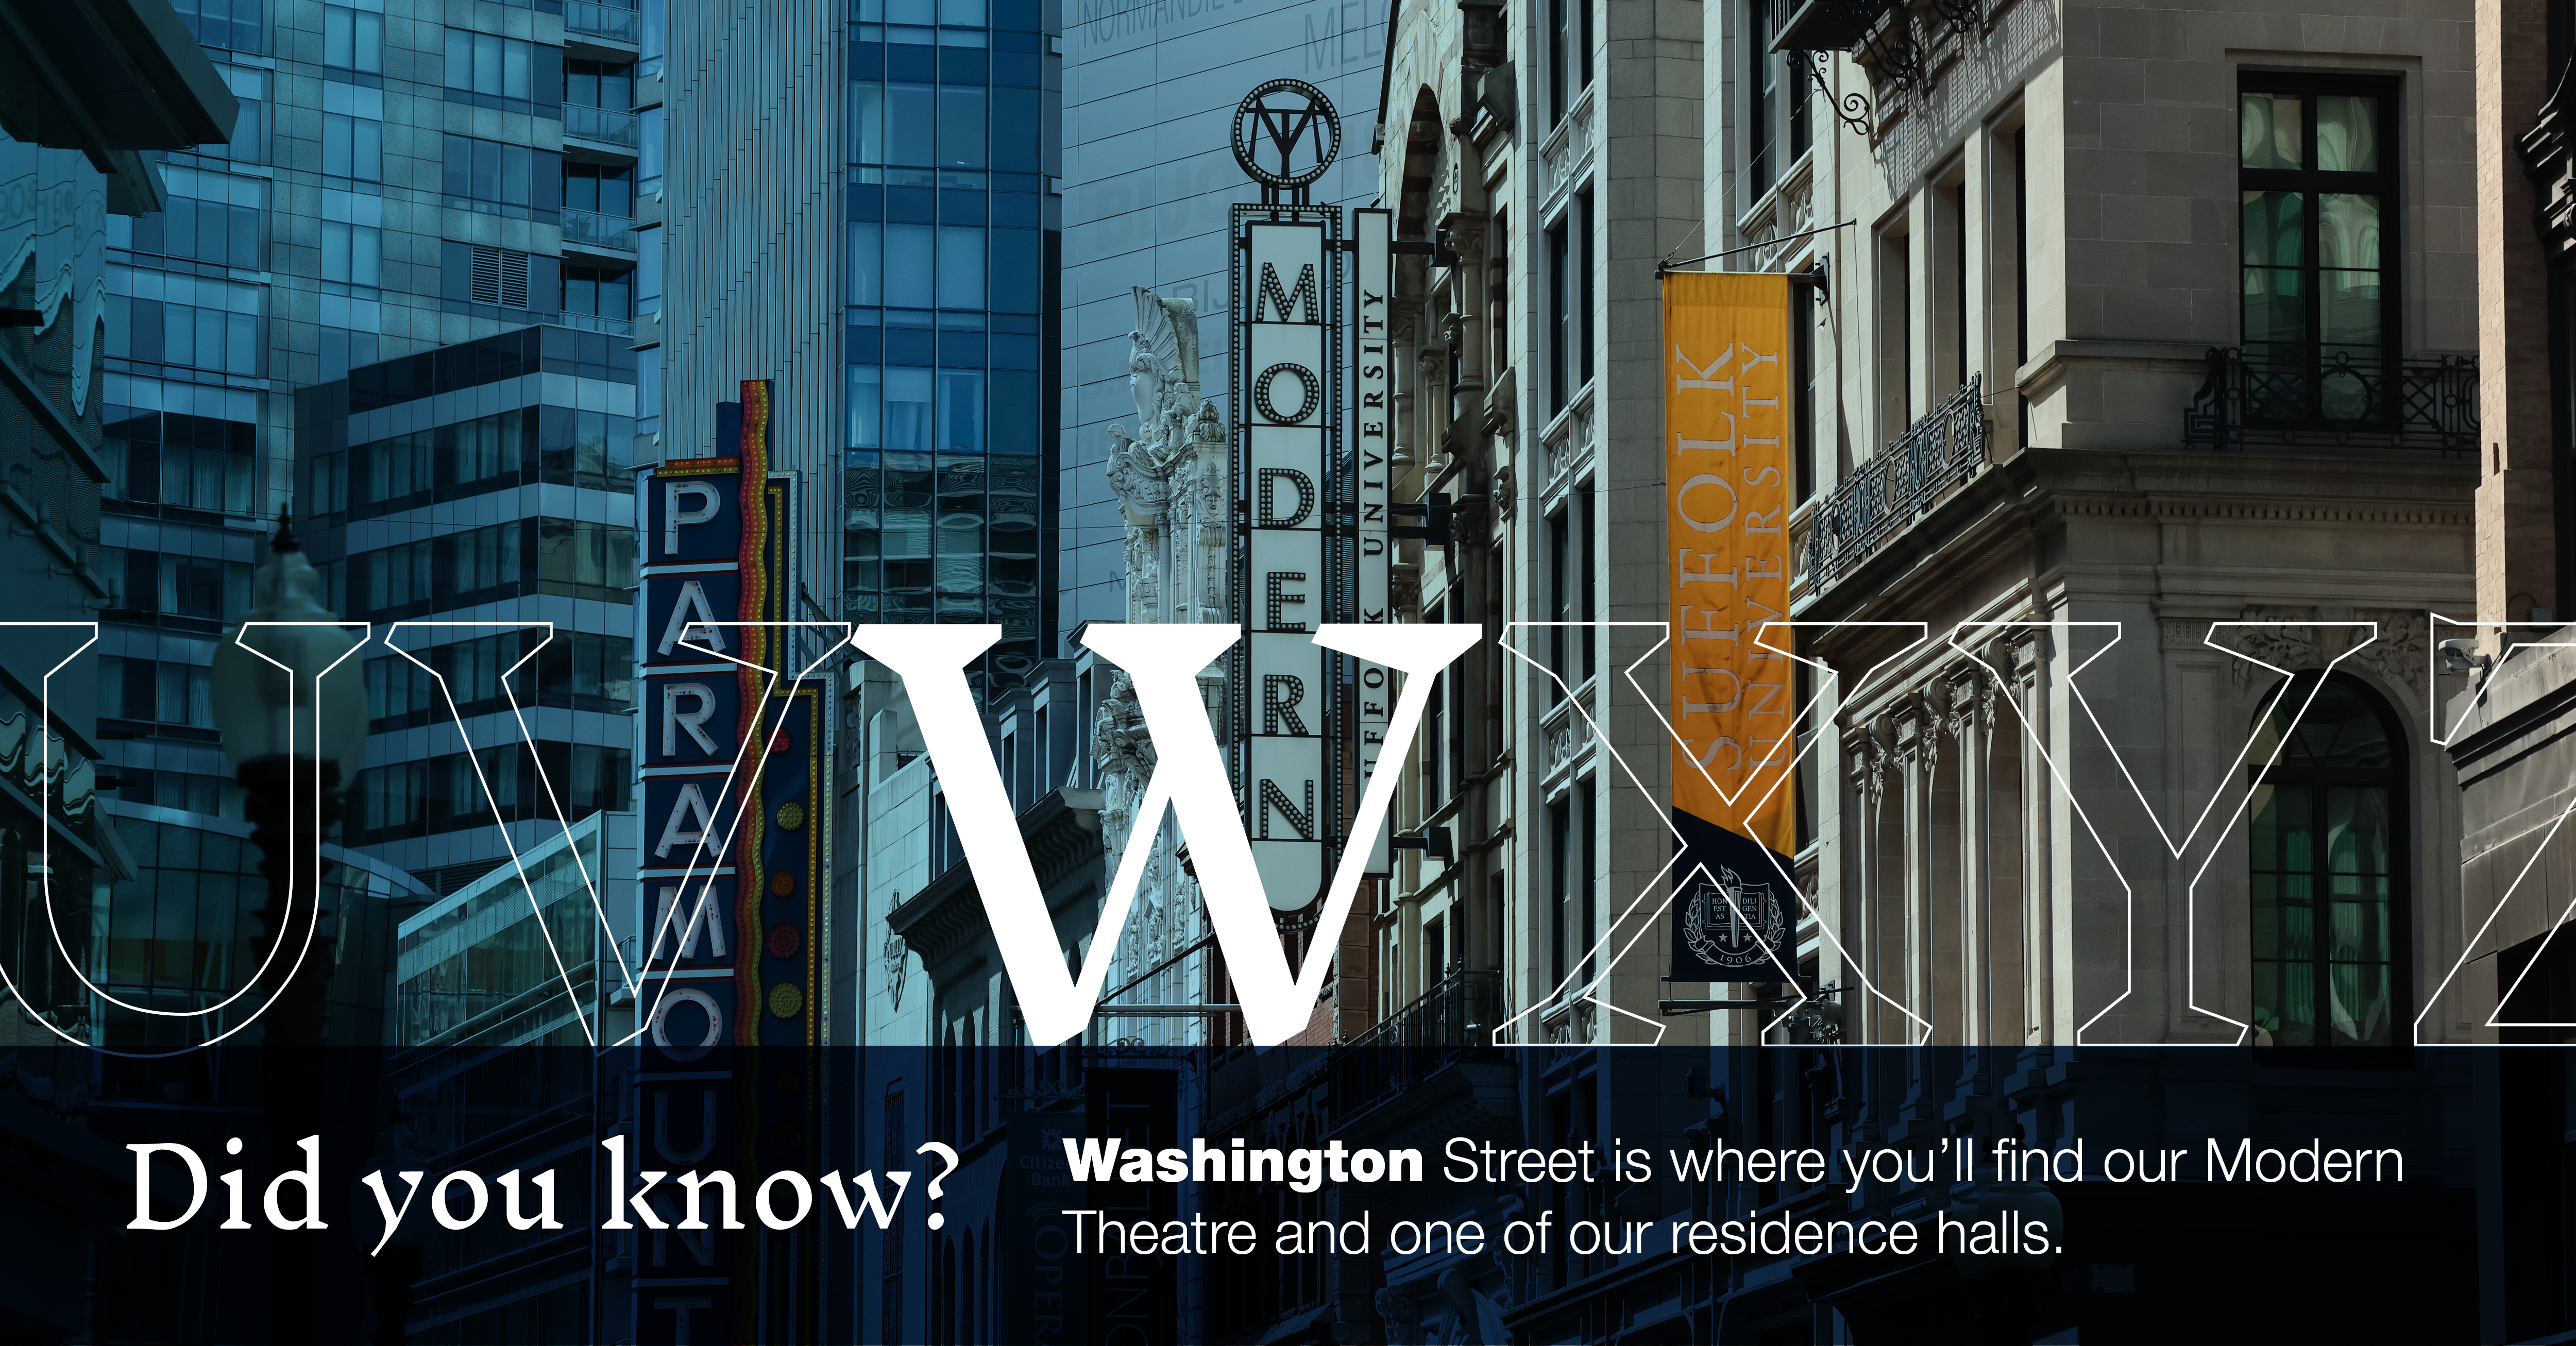 W: [image of theatre marquees on Washington Street] Did you know that Washington Street is where you'll find our Modern Theatre and one of our residence halls?